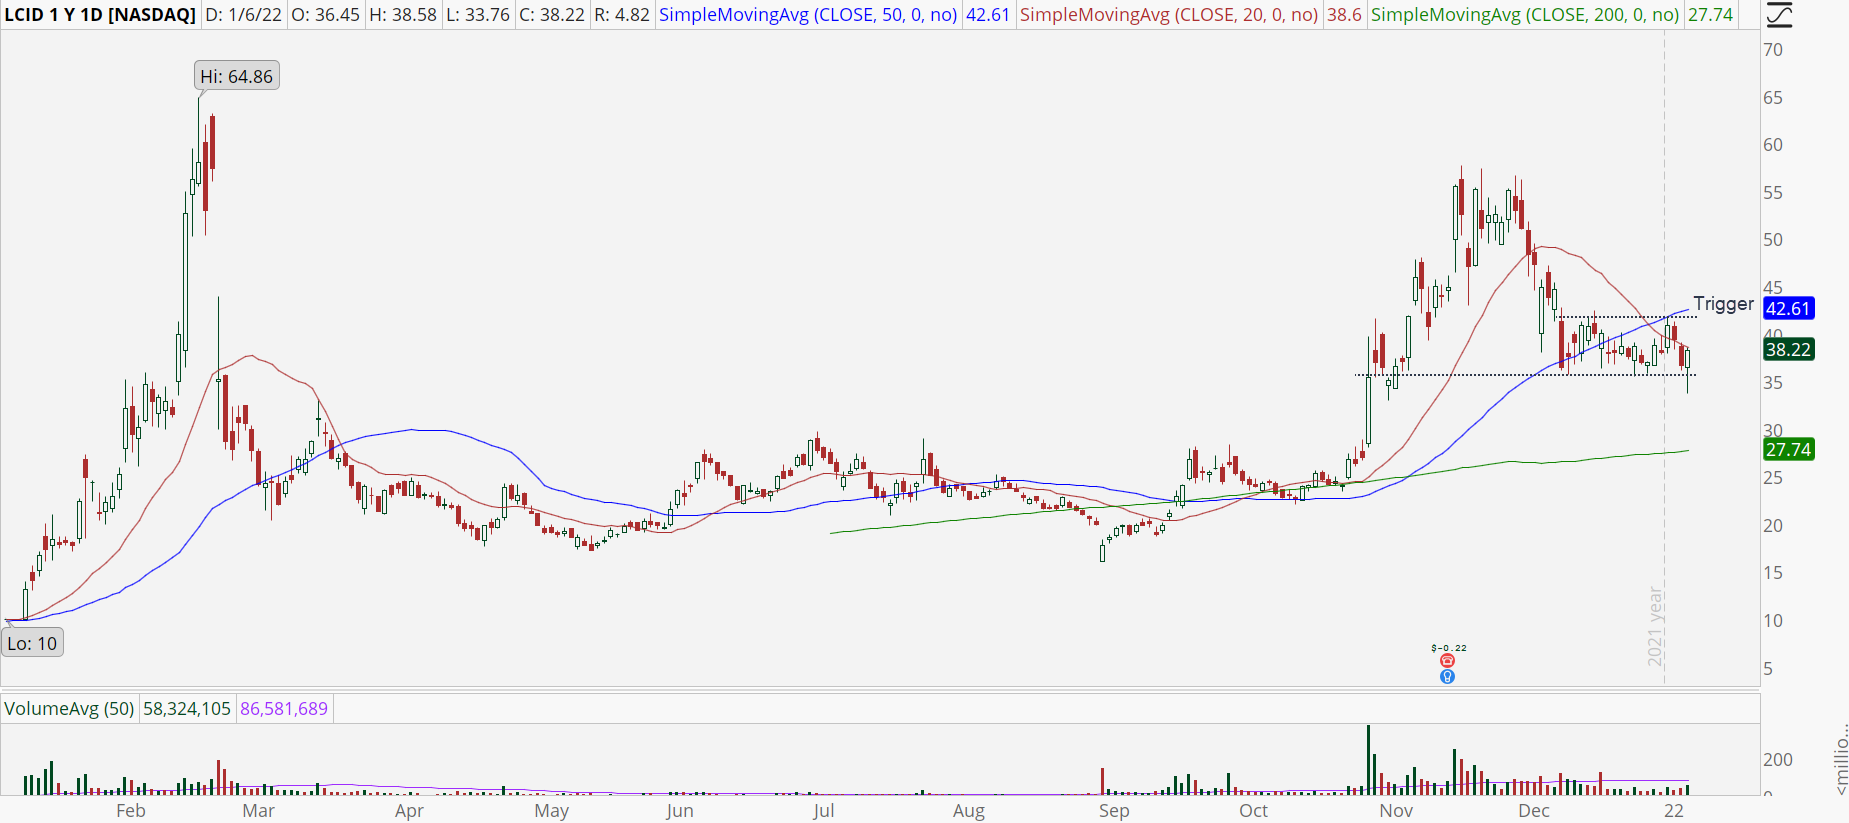 Lucid (LCID) daily chart with potential bullish breakout.